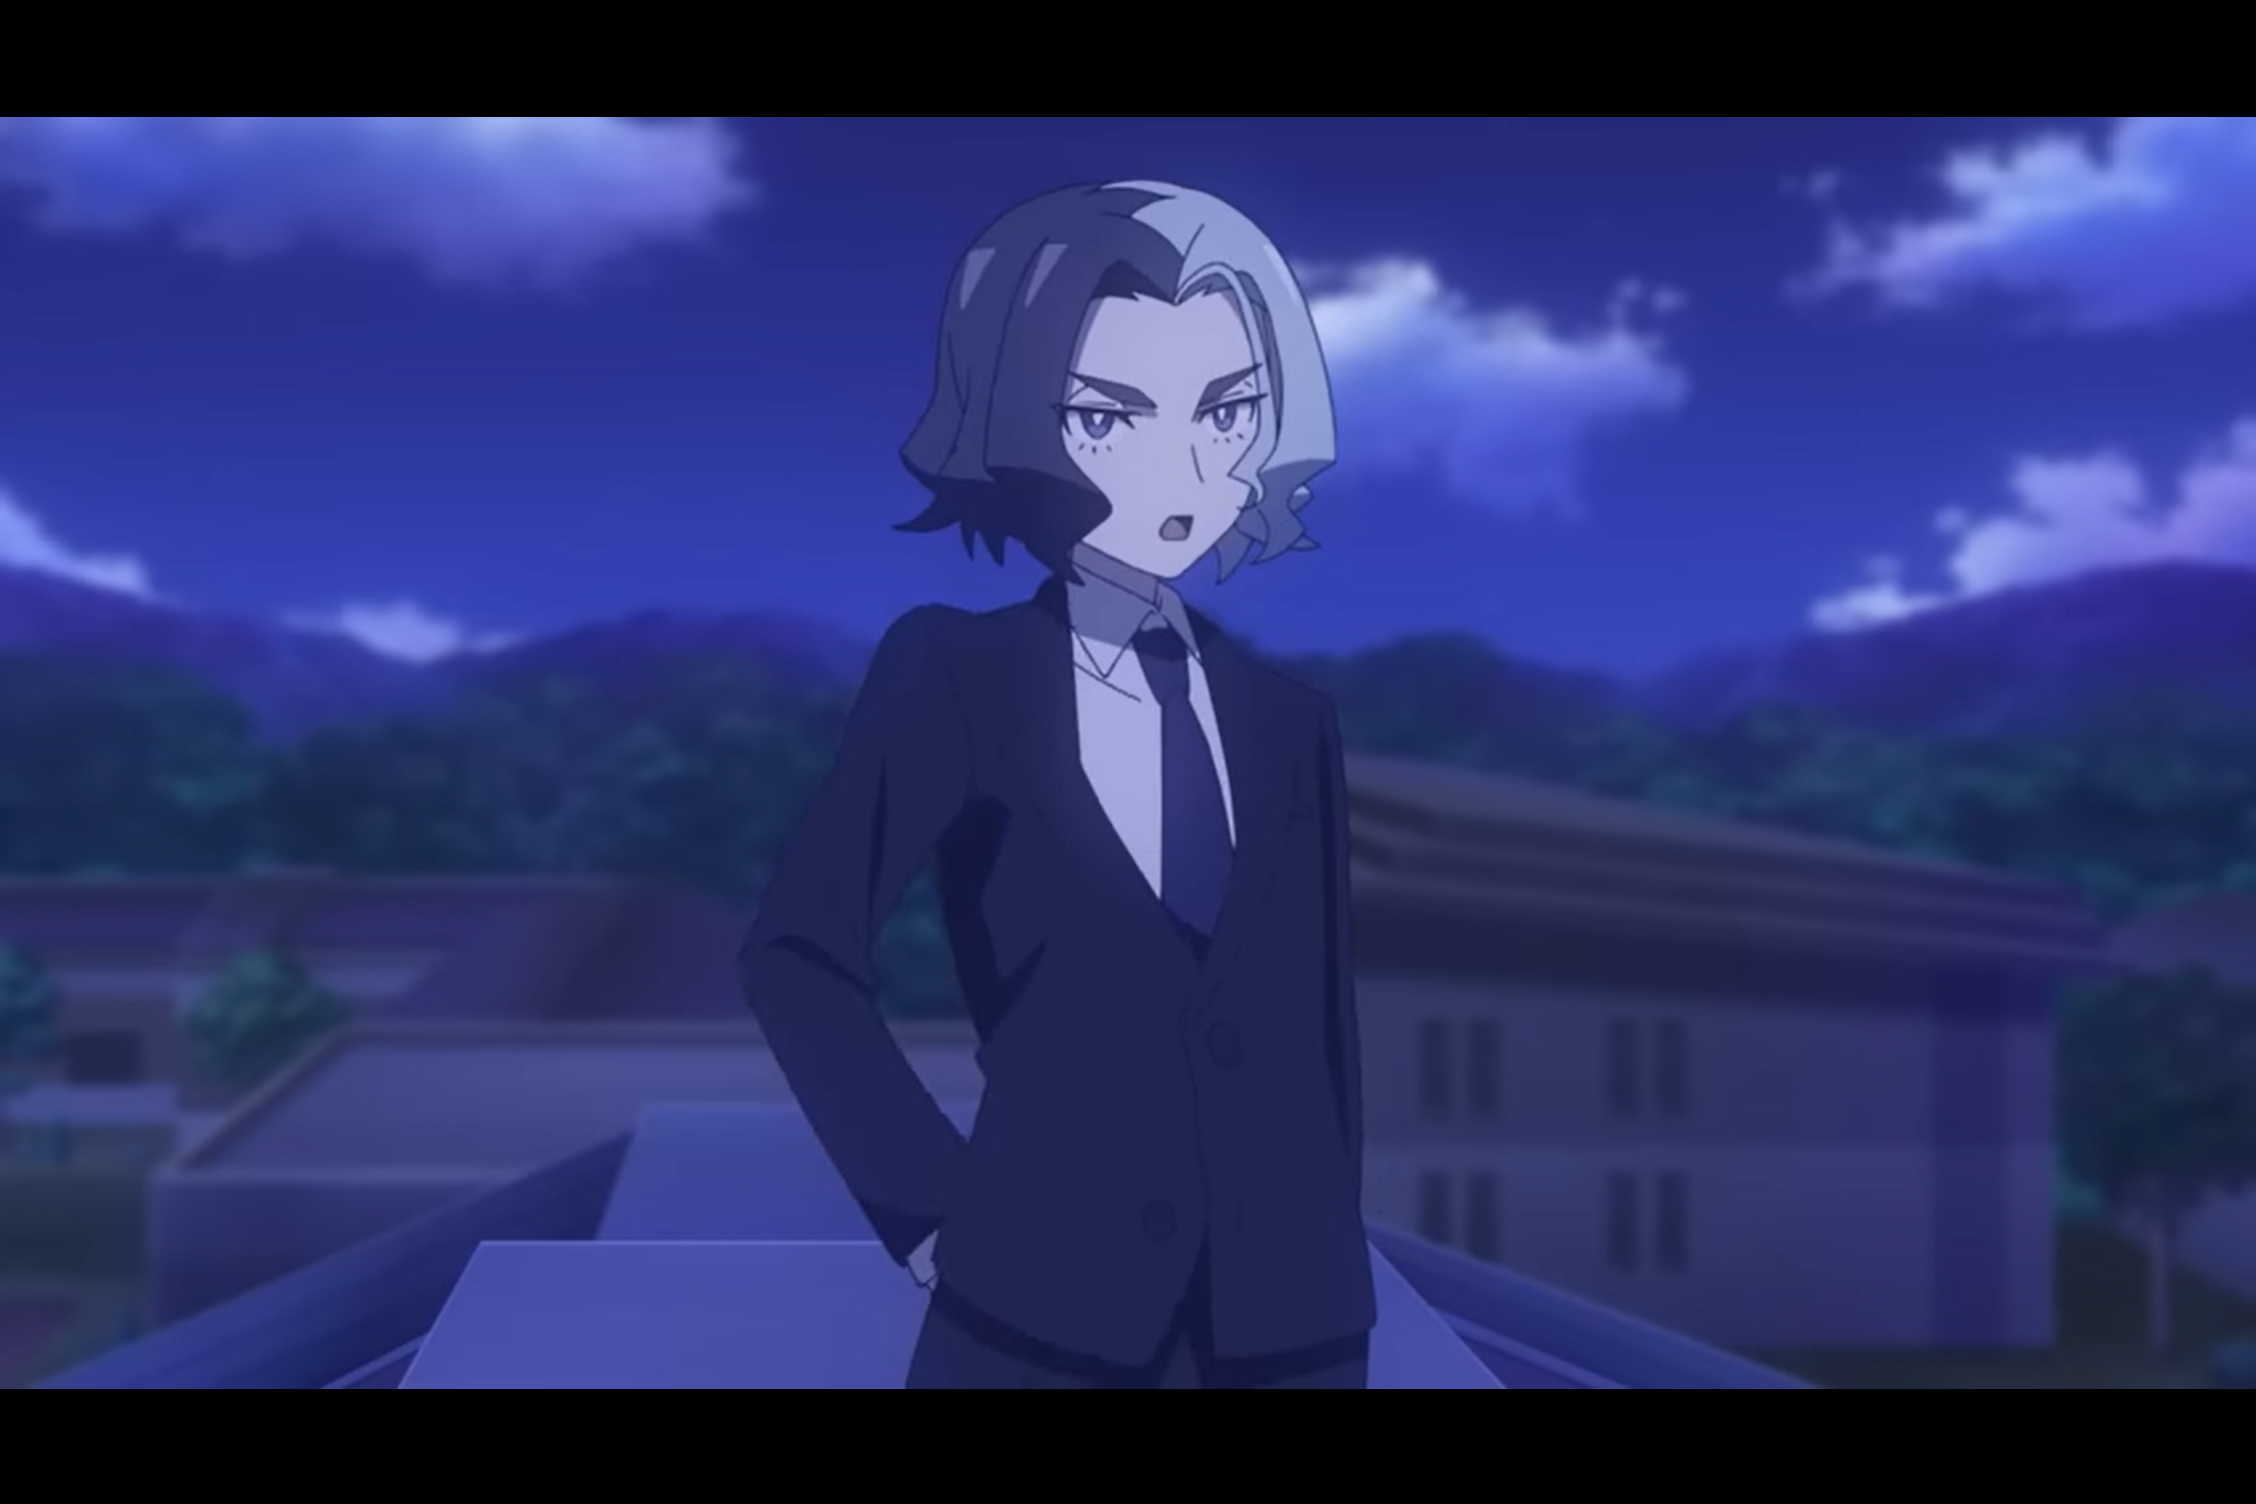 A person in a suit and tie with blue and white hair, split down the middle. From the Pokemon anime.